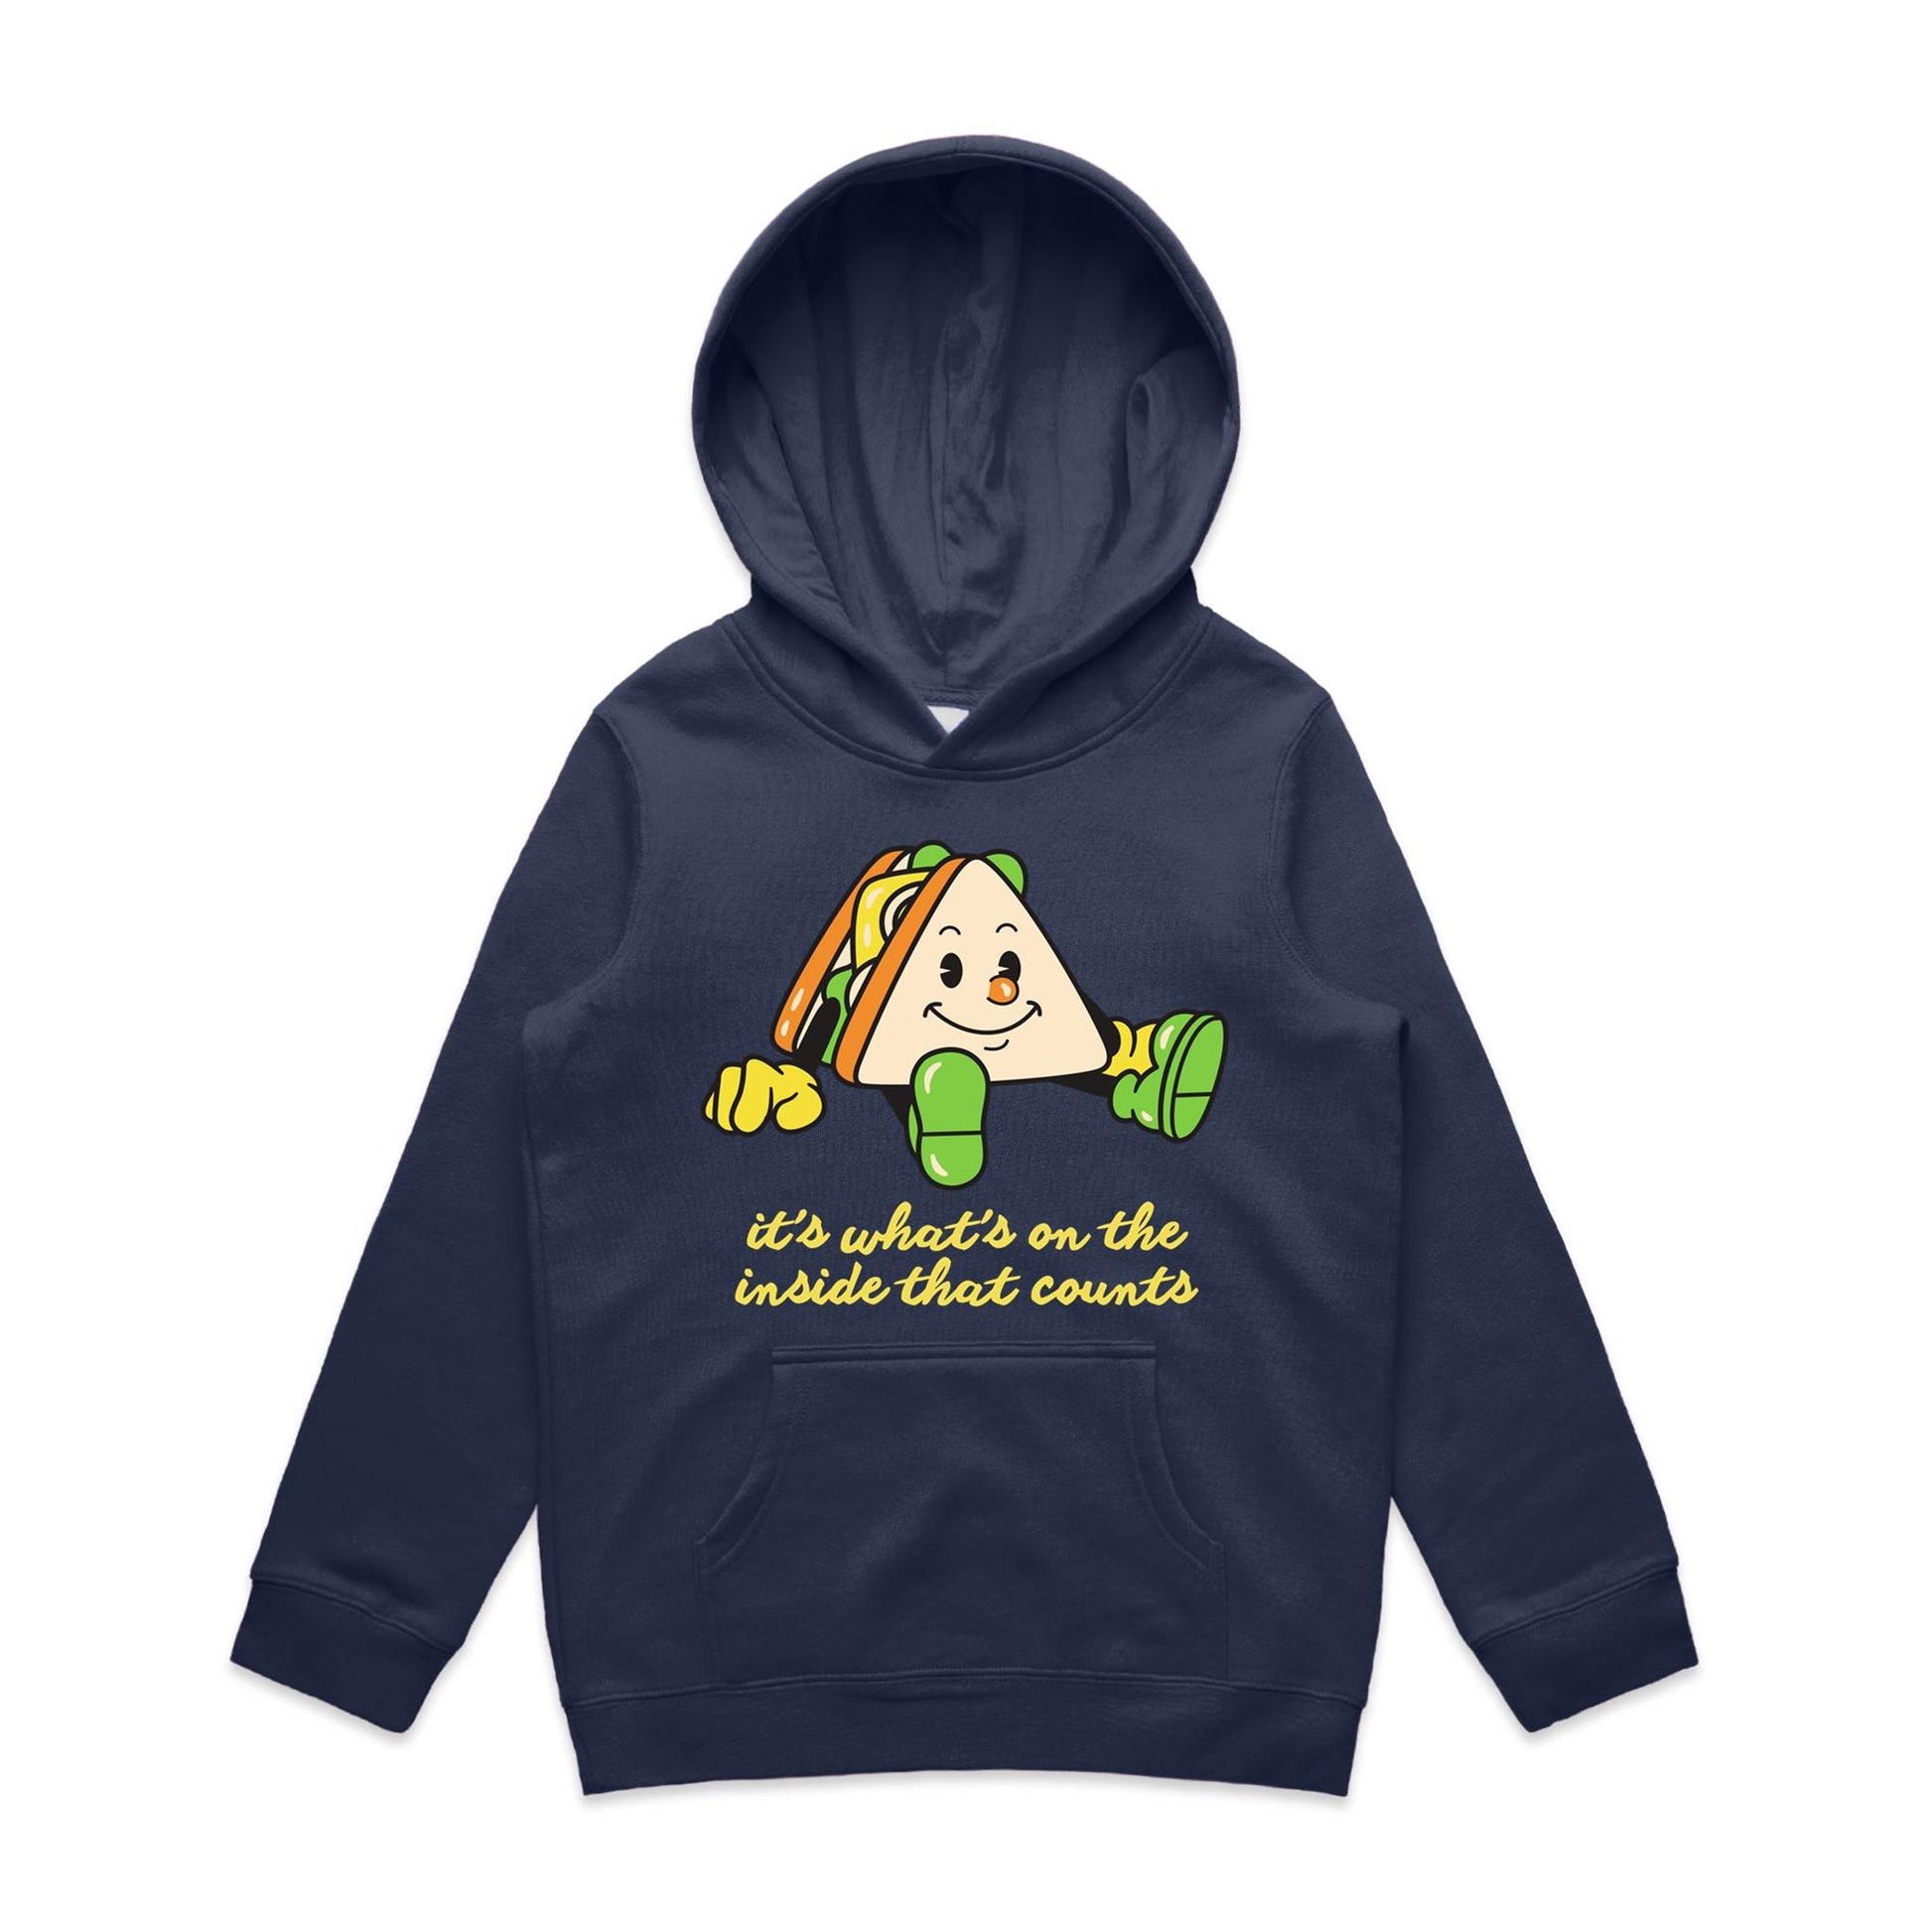 Sandwich, It's What's On The Inside That Counts - Youth Supply Hood Midnight Blue Kids Hoodie Food Motivation